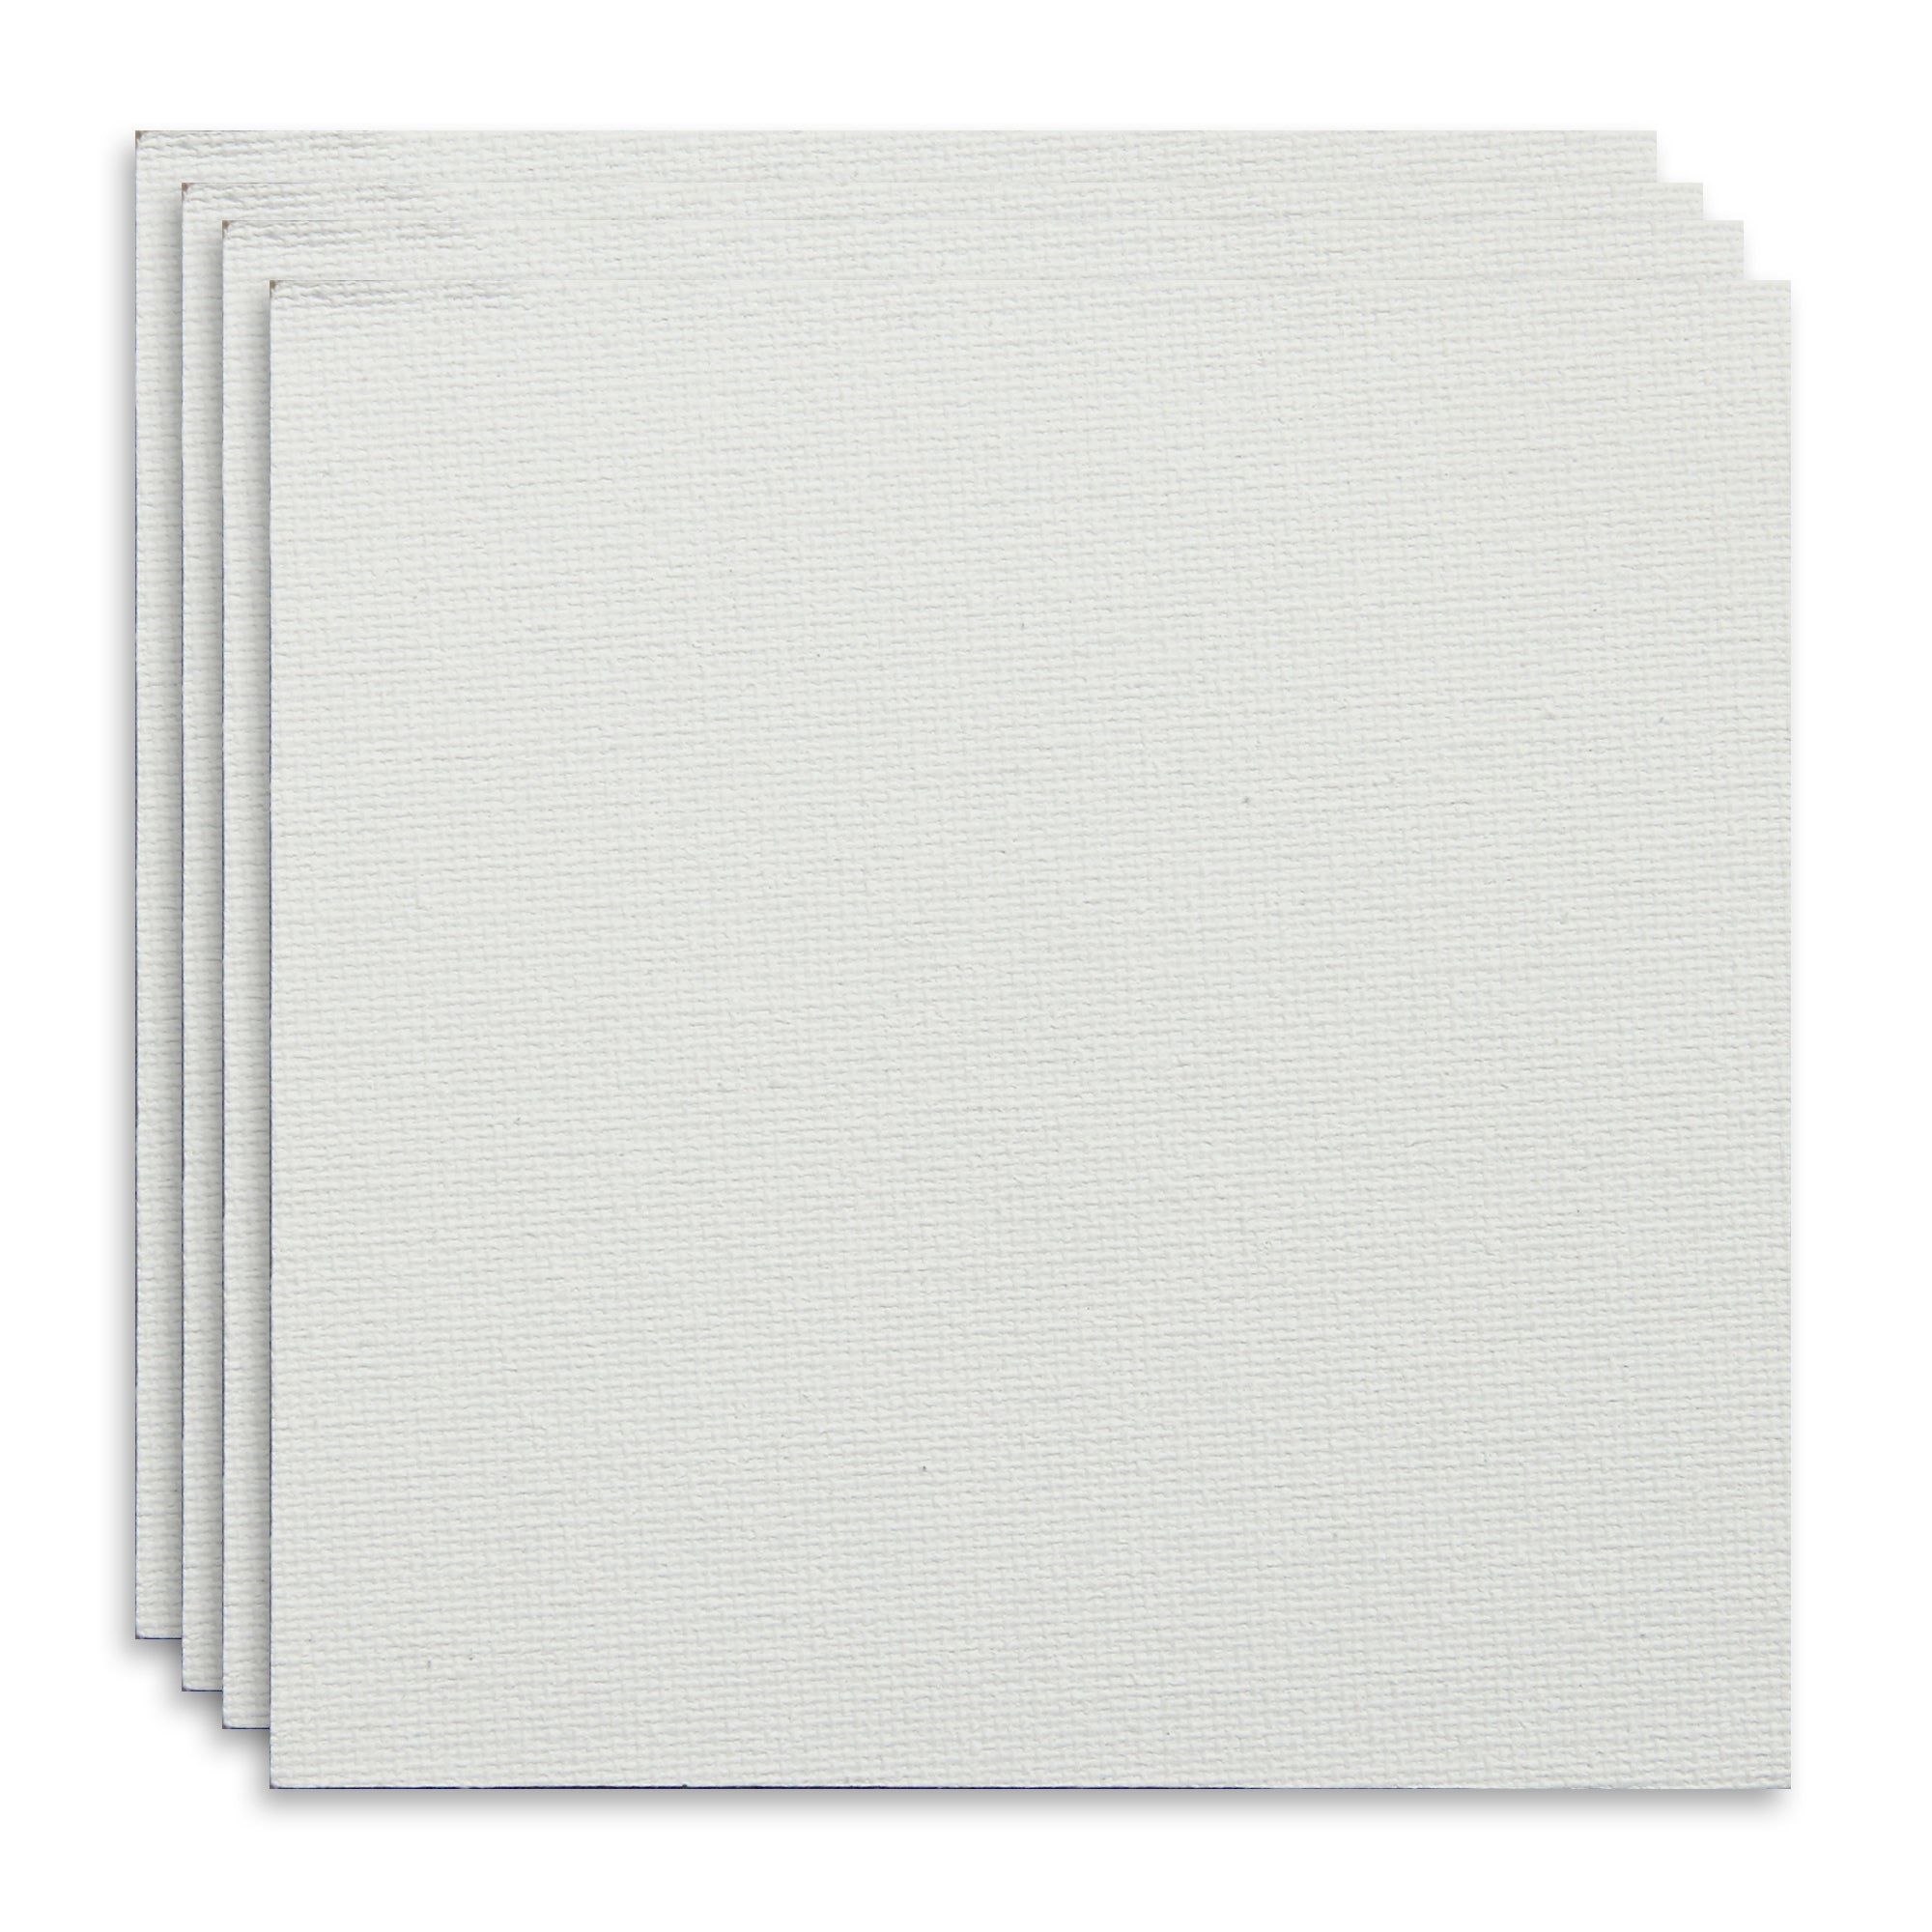 Canvas Board Square 4 X 4Inch 230Gsm 2Mm Thick 4Pc Shrink Lb